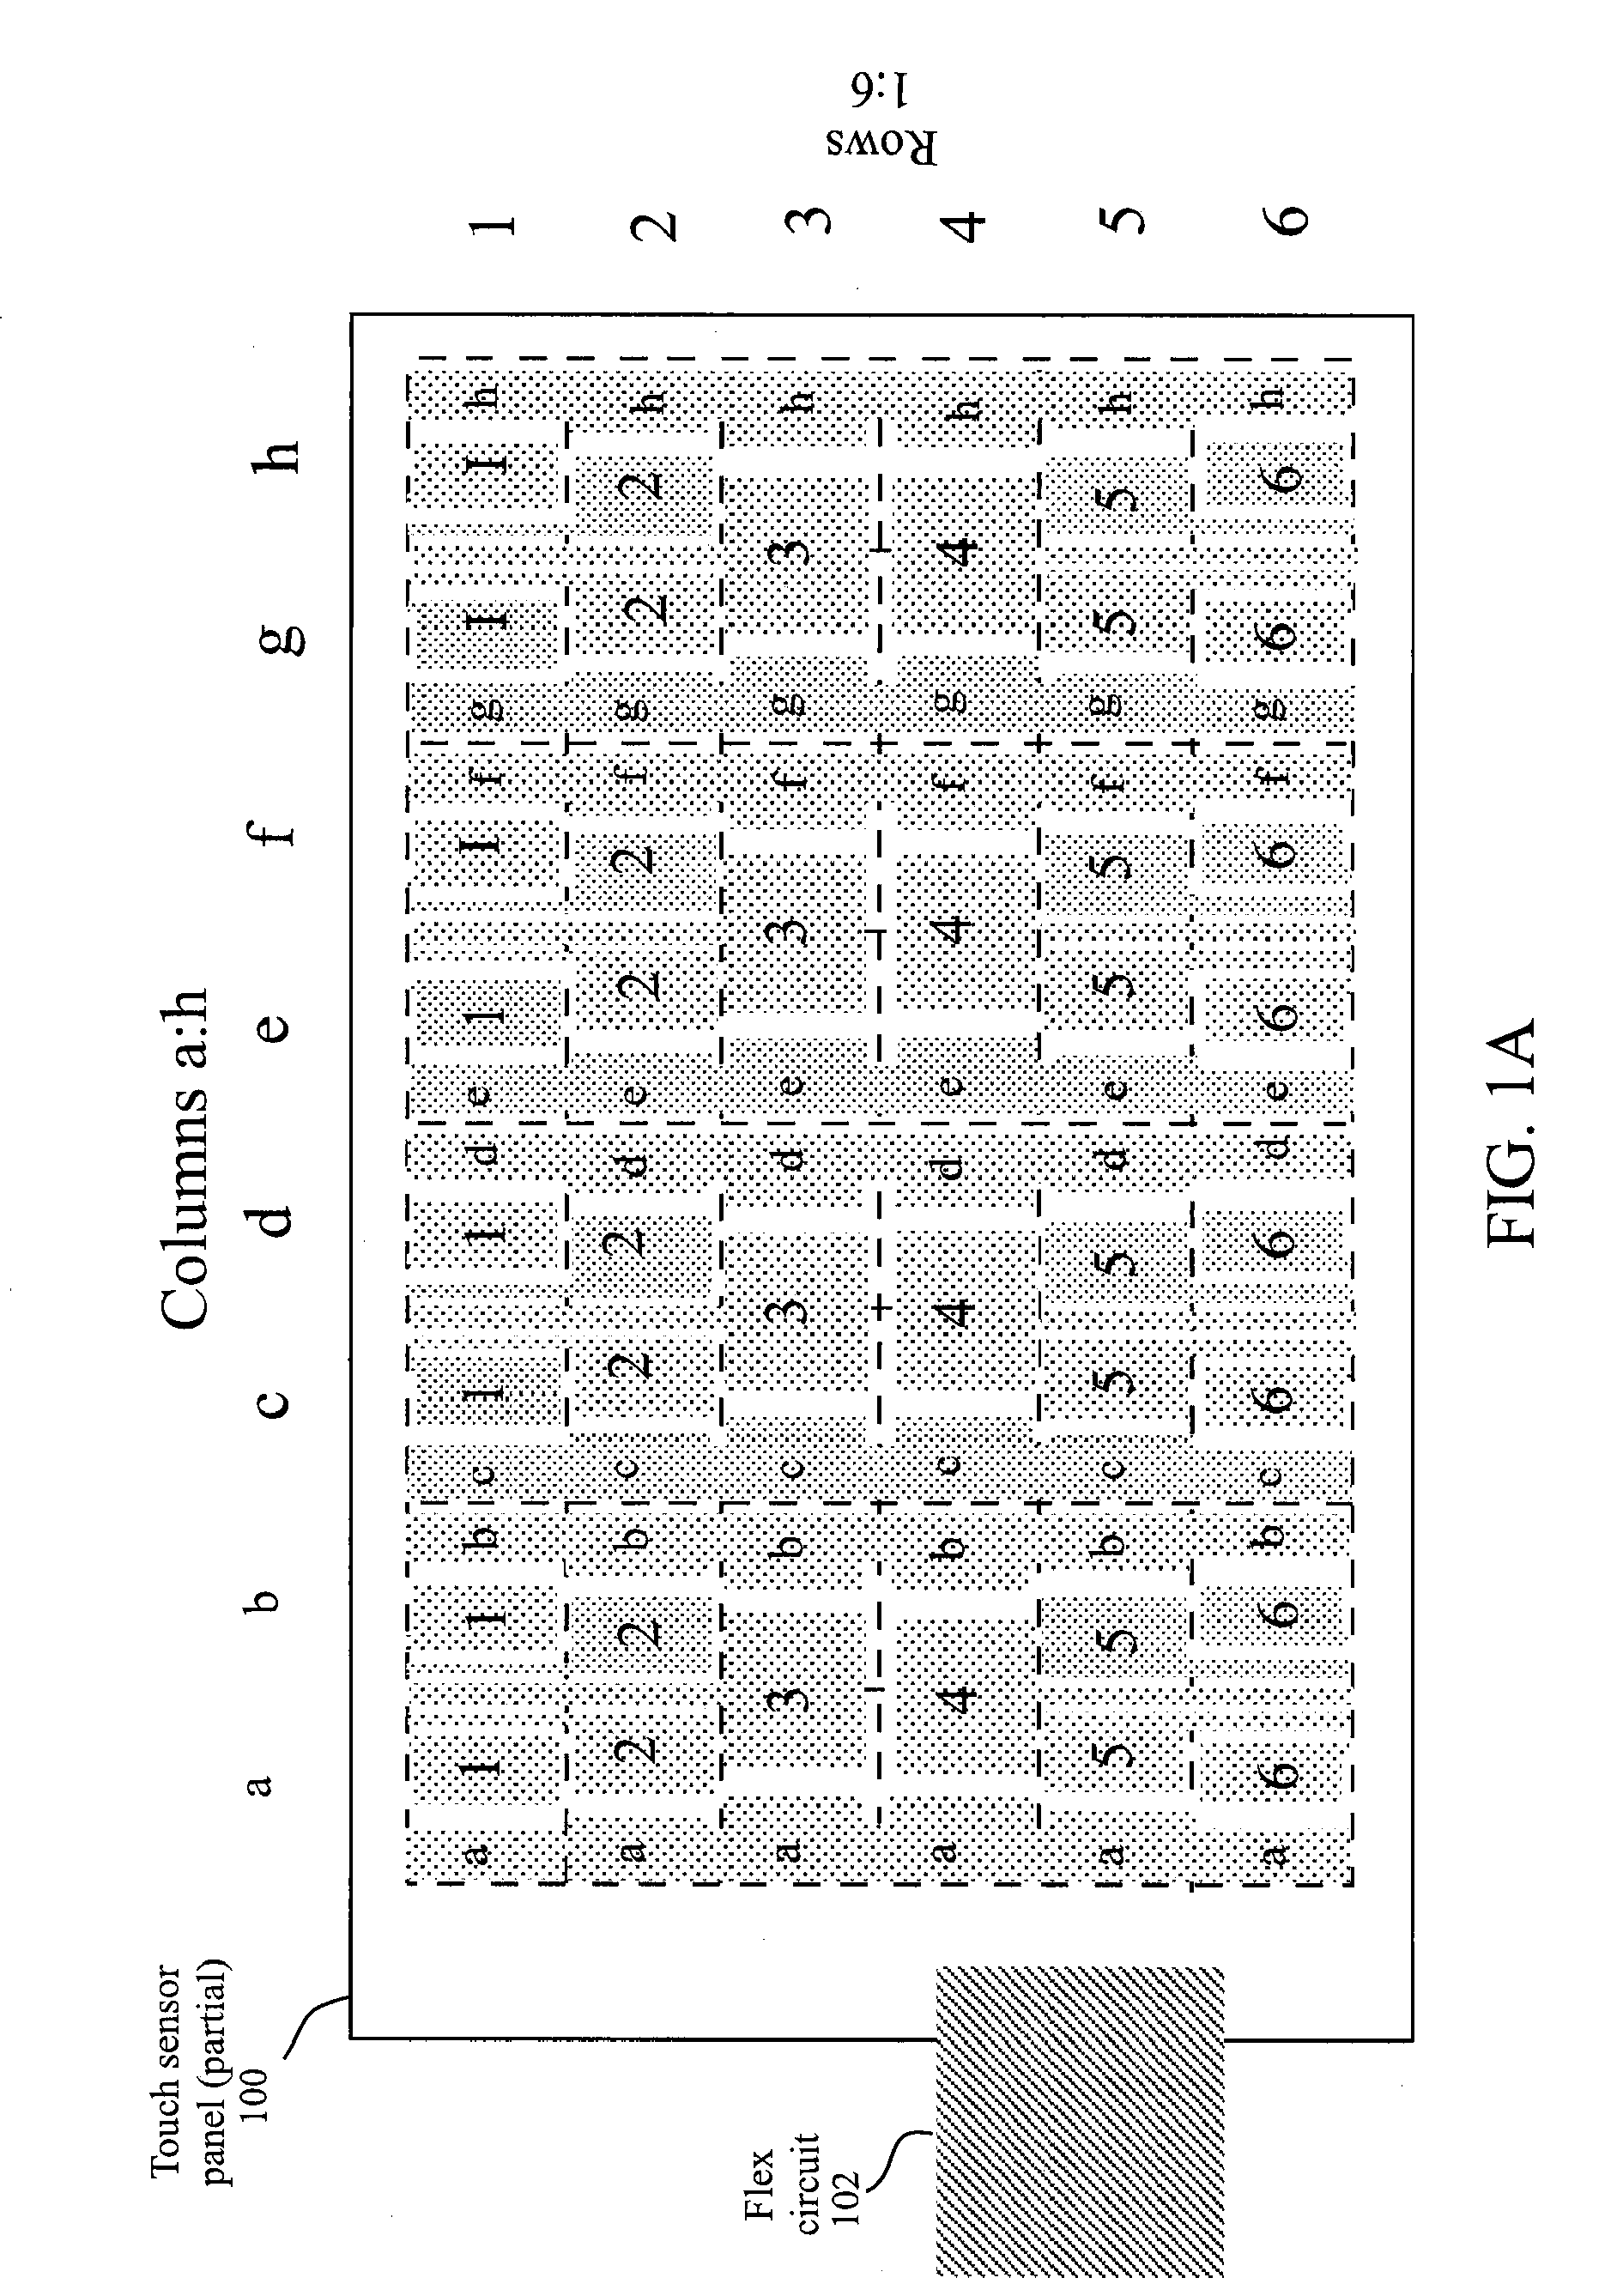 Single-layer touch-sensitive display